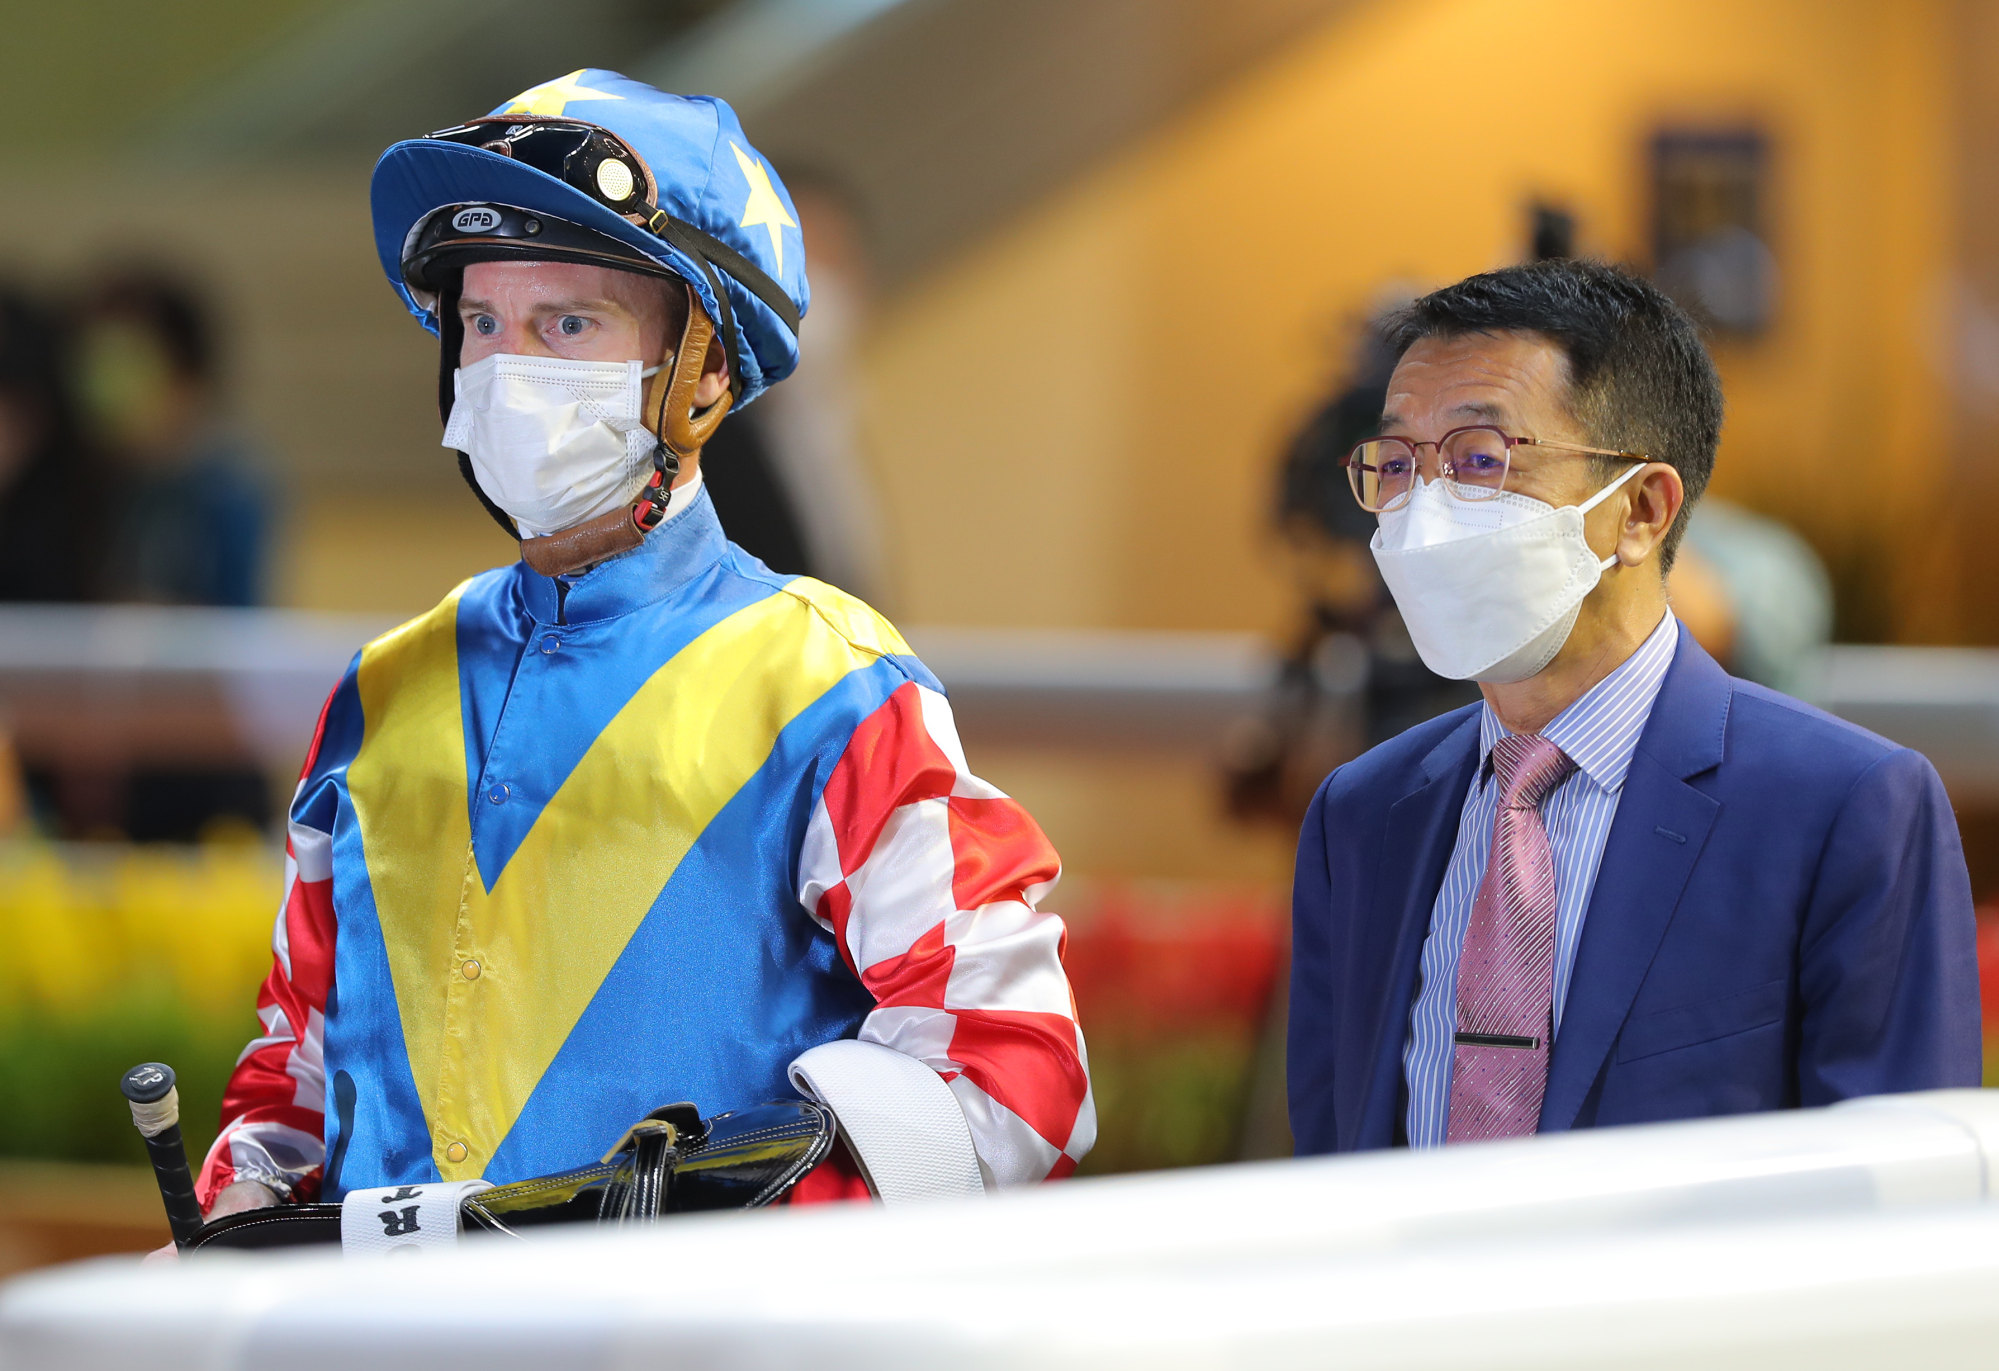 Jockey Zac Purton and trainer Me Tsui after Telecom Fighters’ victory.